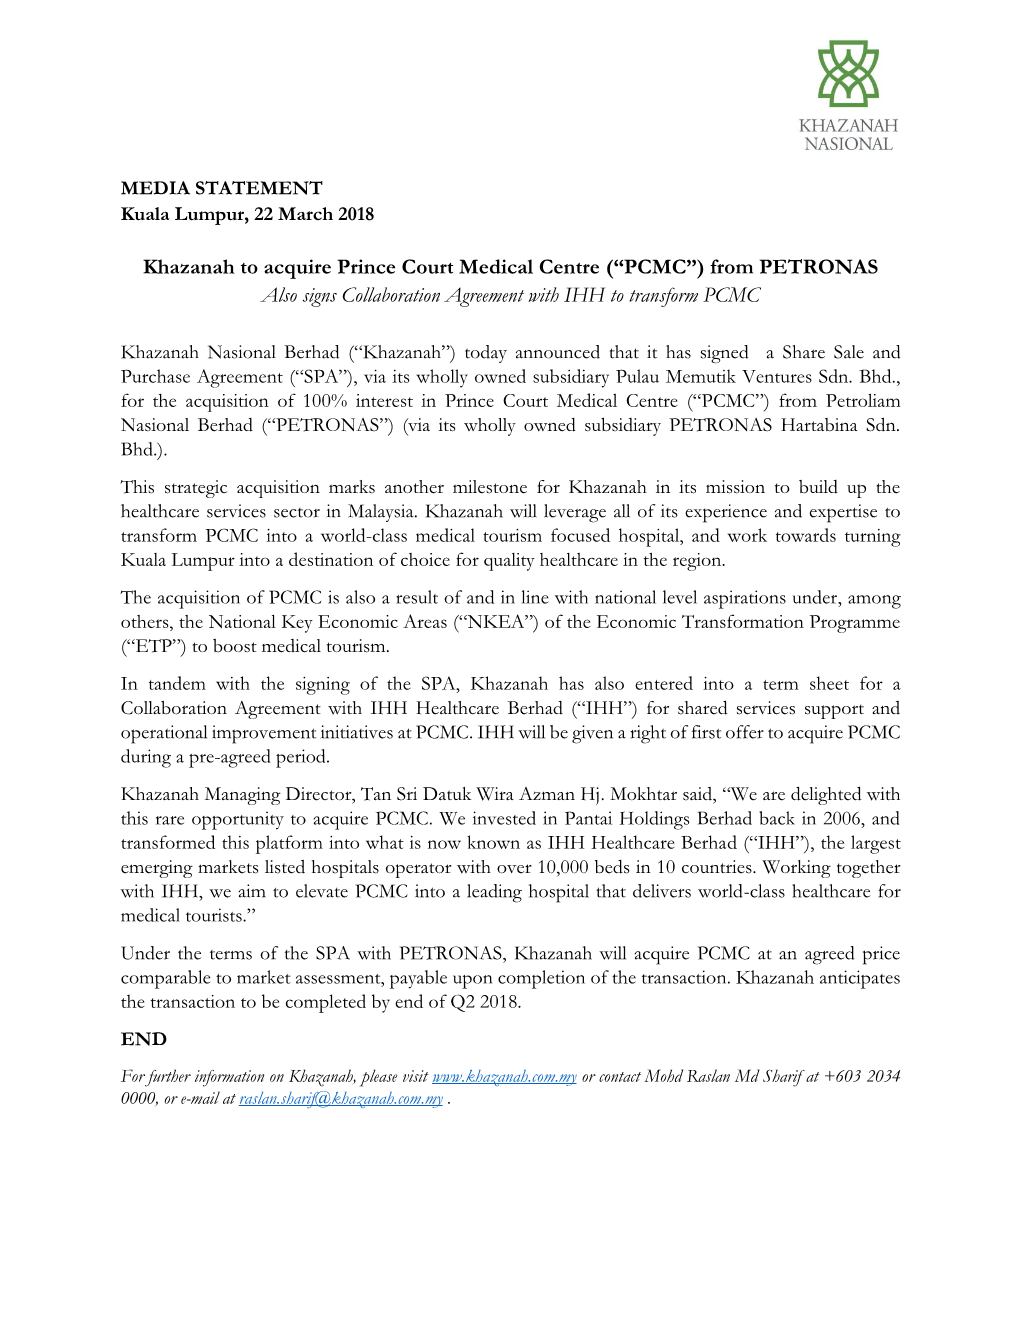 Khazanah to Acquire Prince Court Medical Centre (“PCMC”) from PETRONAS Also Signs Collaboration Agreement with IHH to Transform PCMC